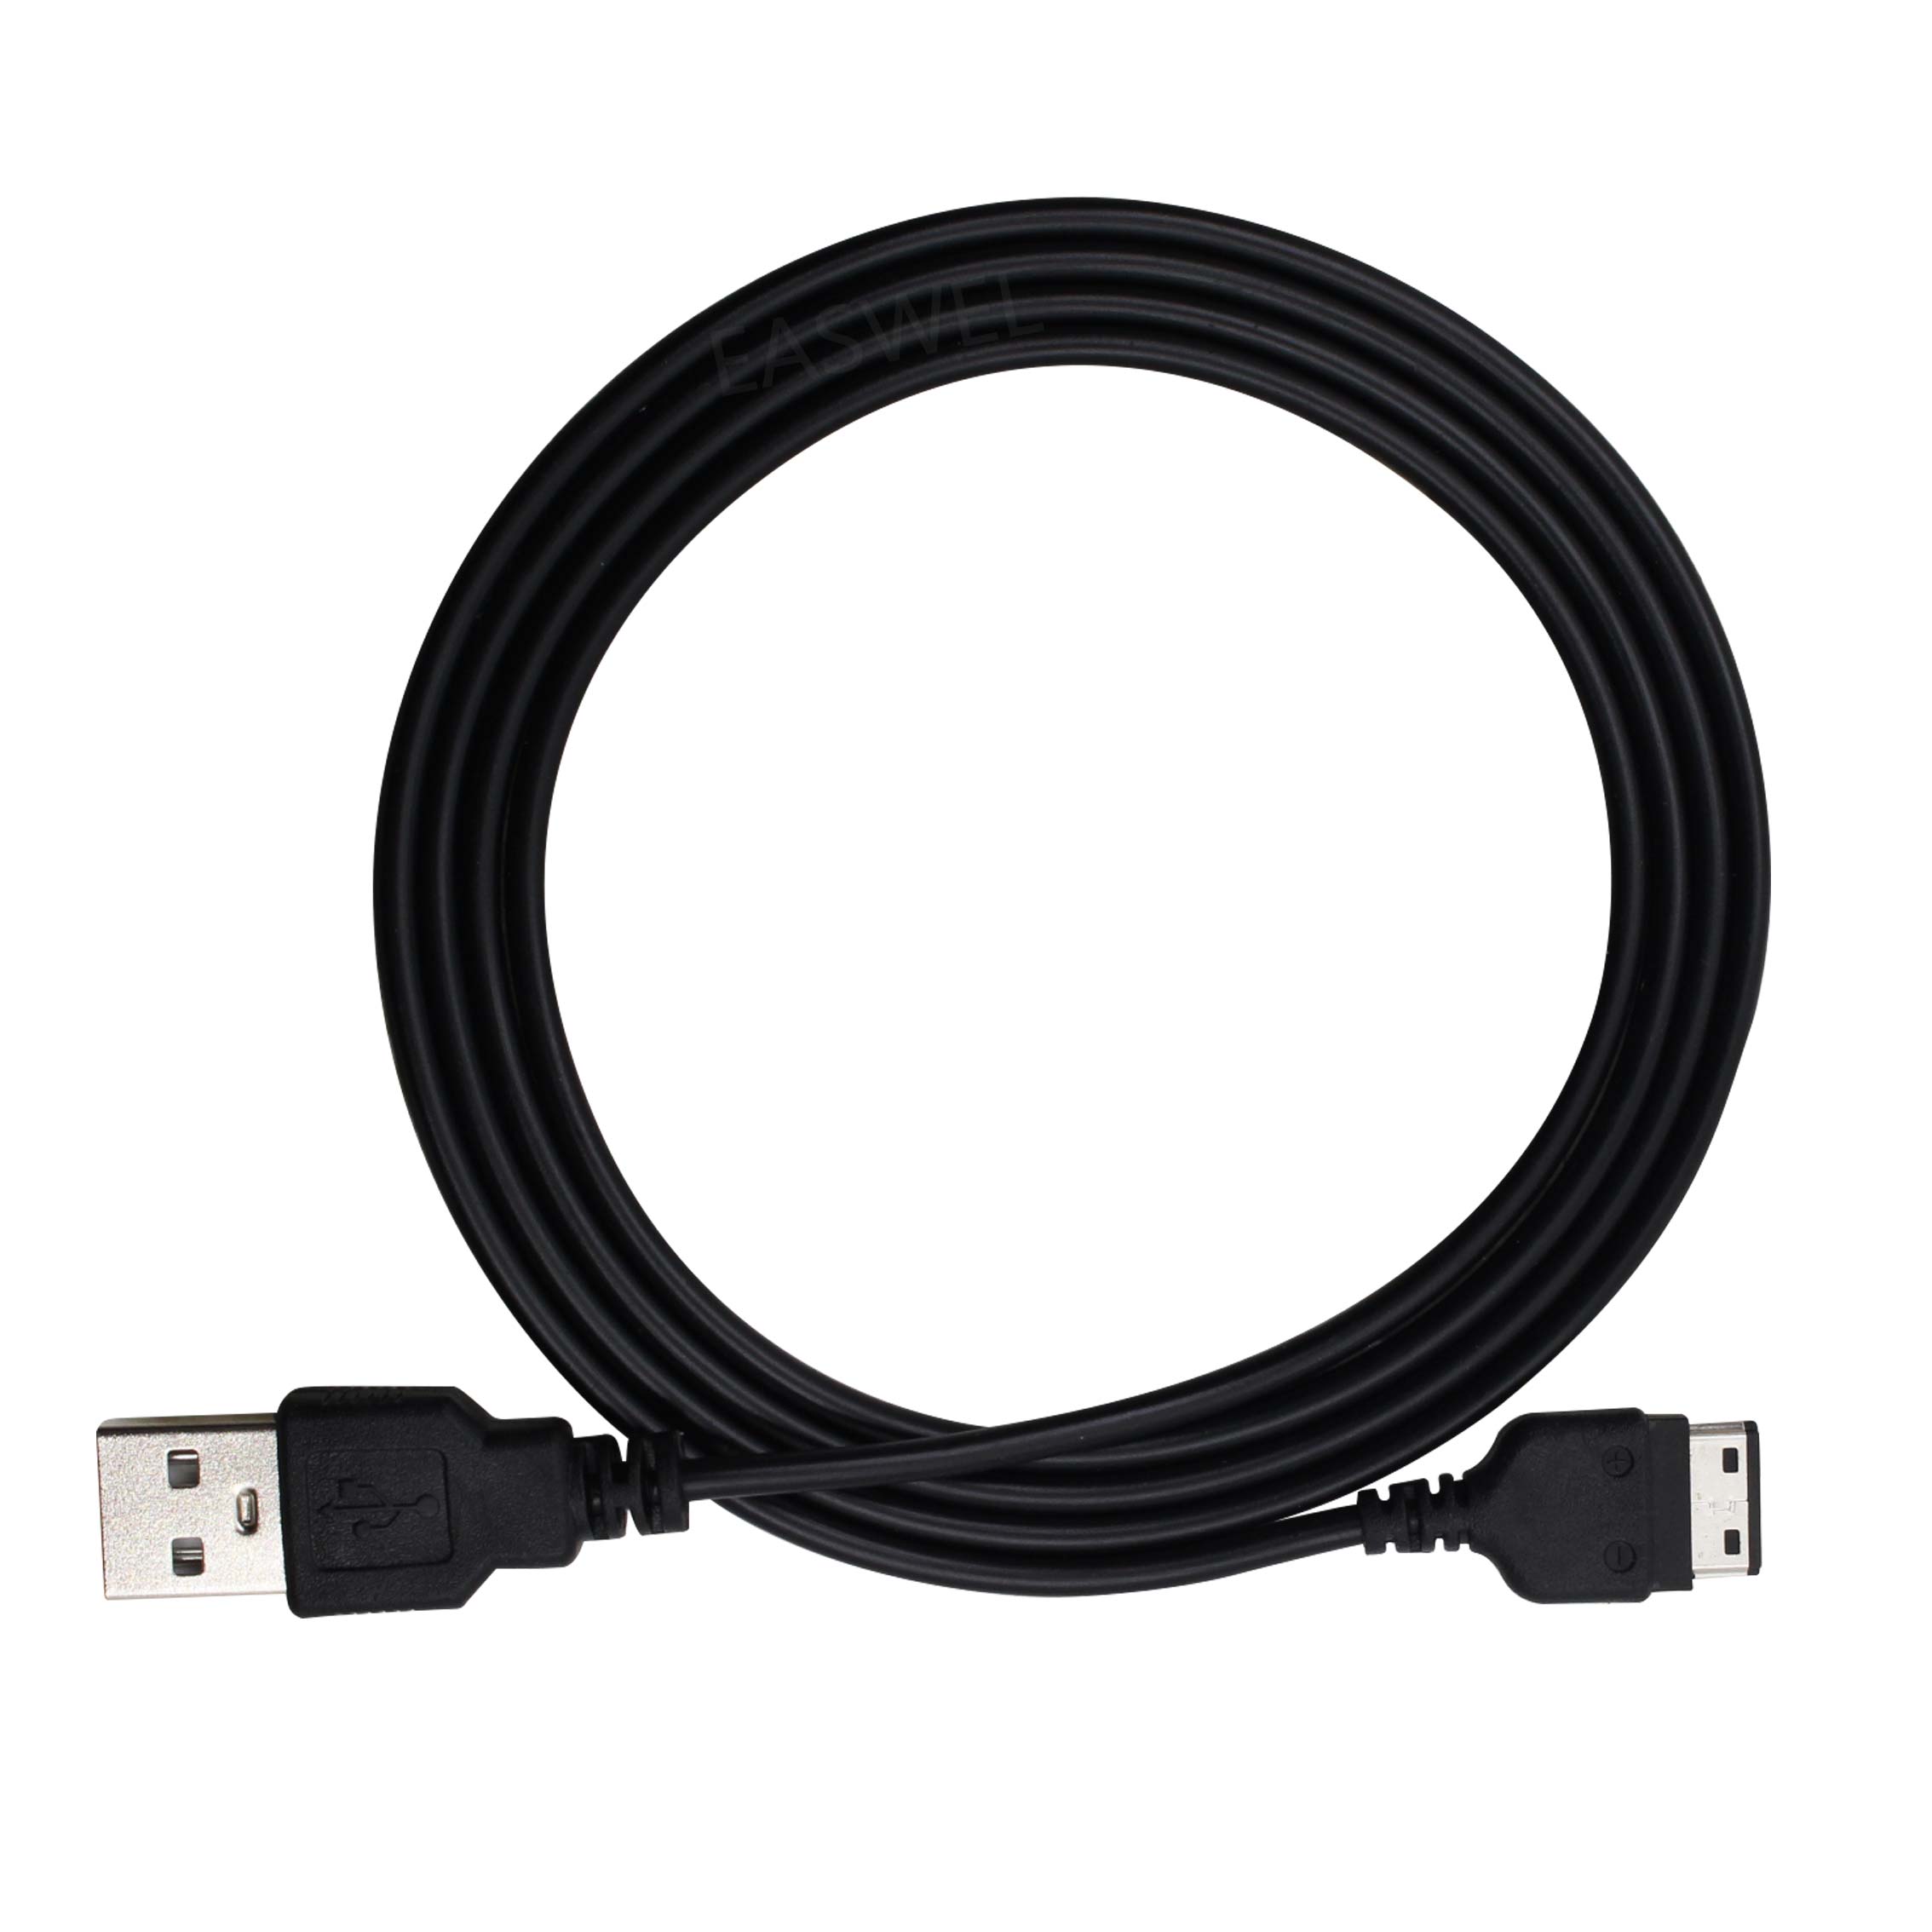 USB Charger Data Cable Koord voor Samsung gt-e1360 sgh-e210 gt-e2100 gt-e2120